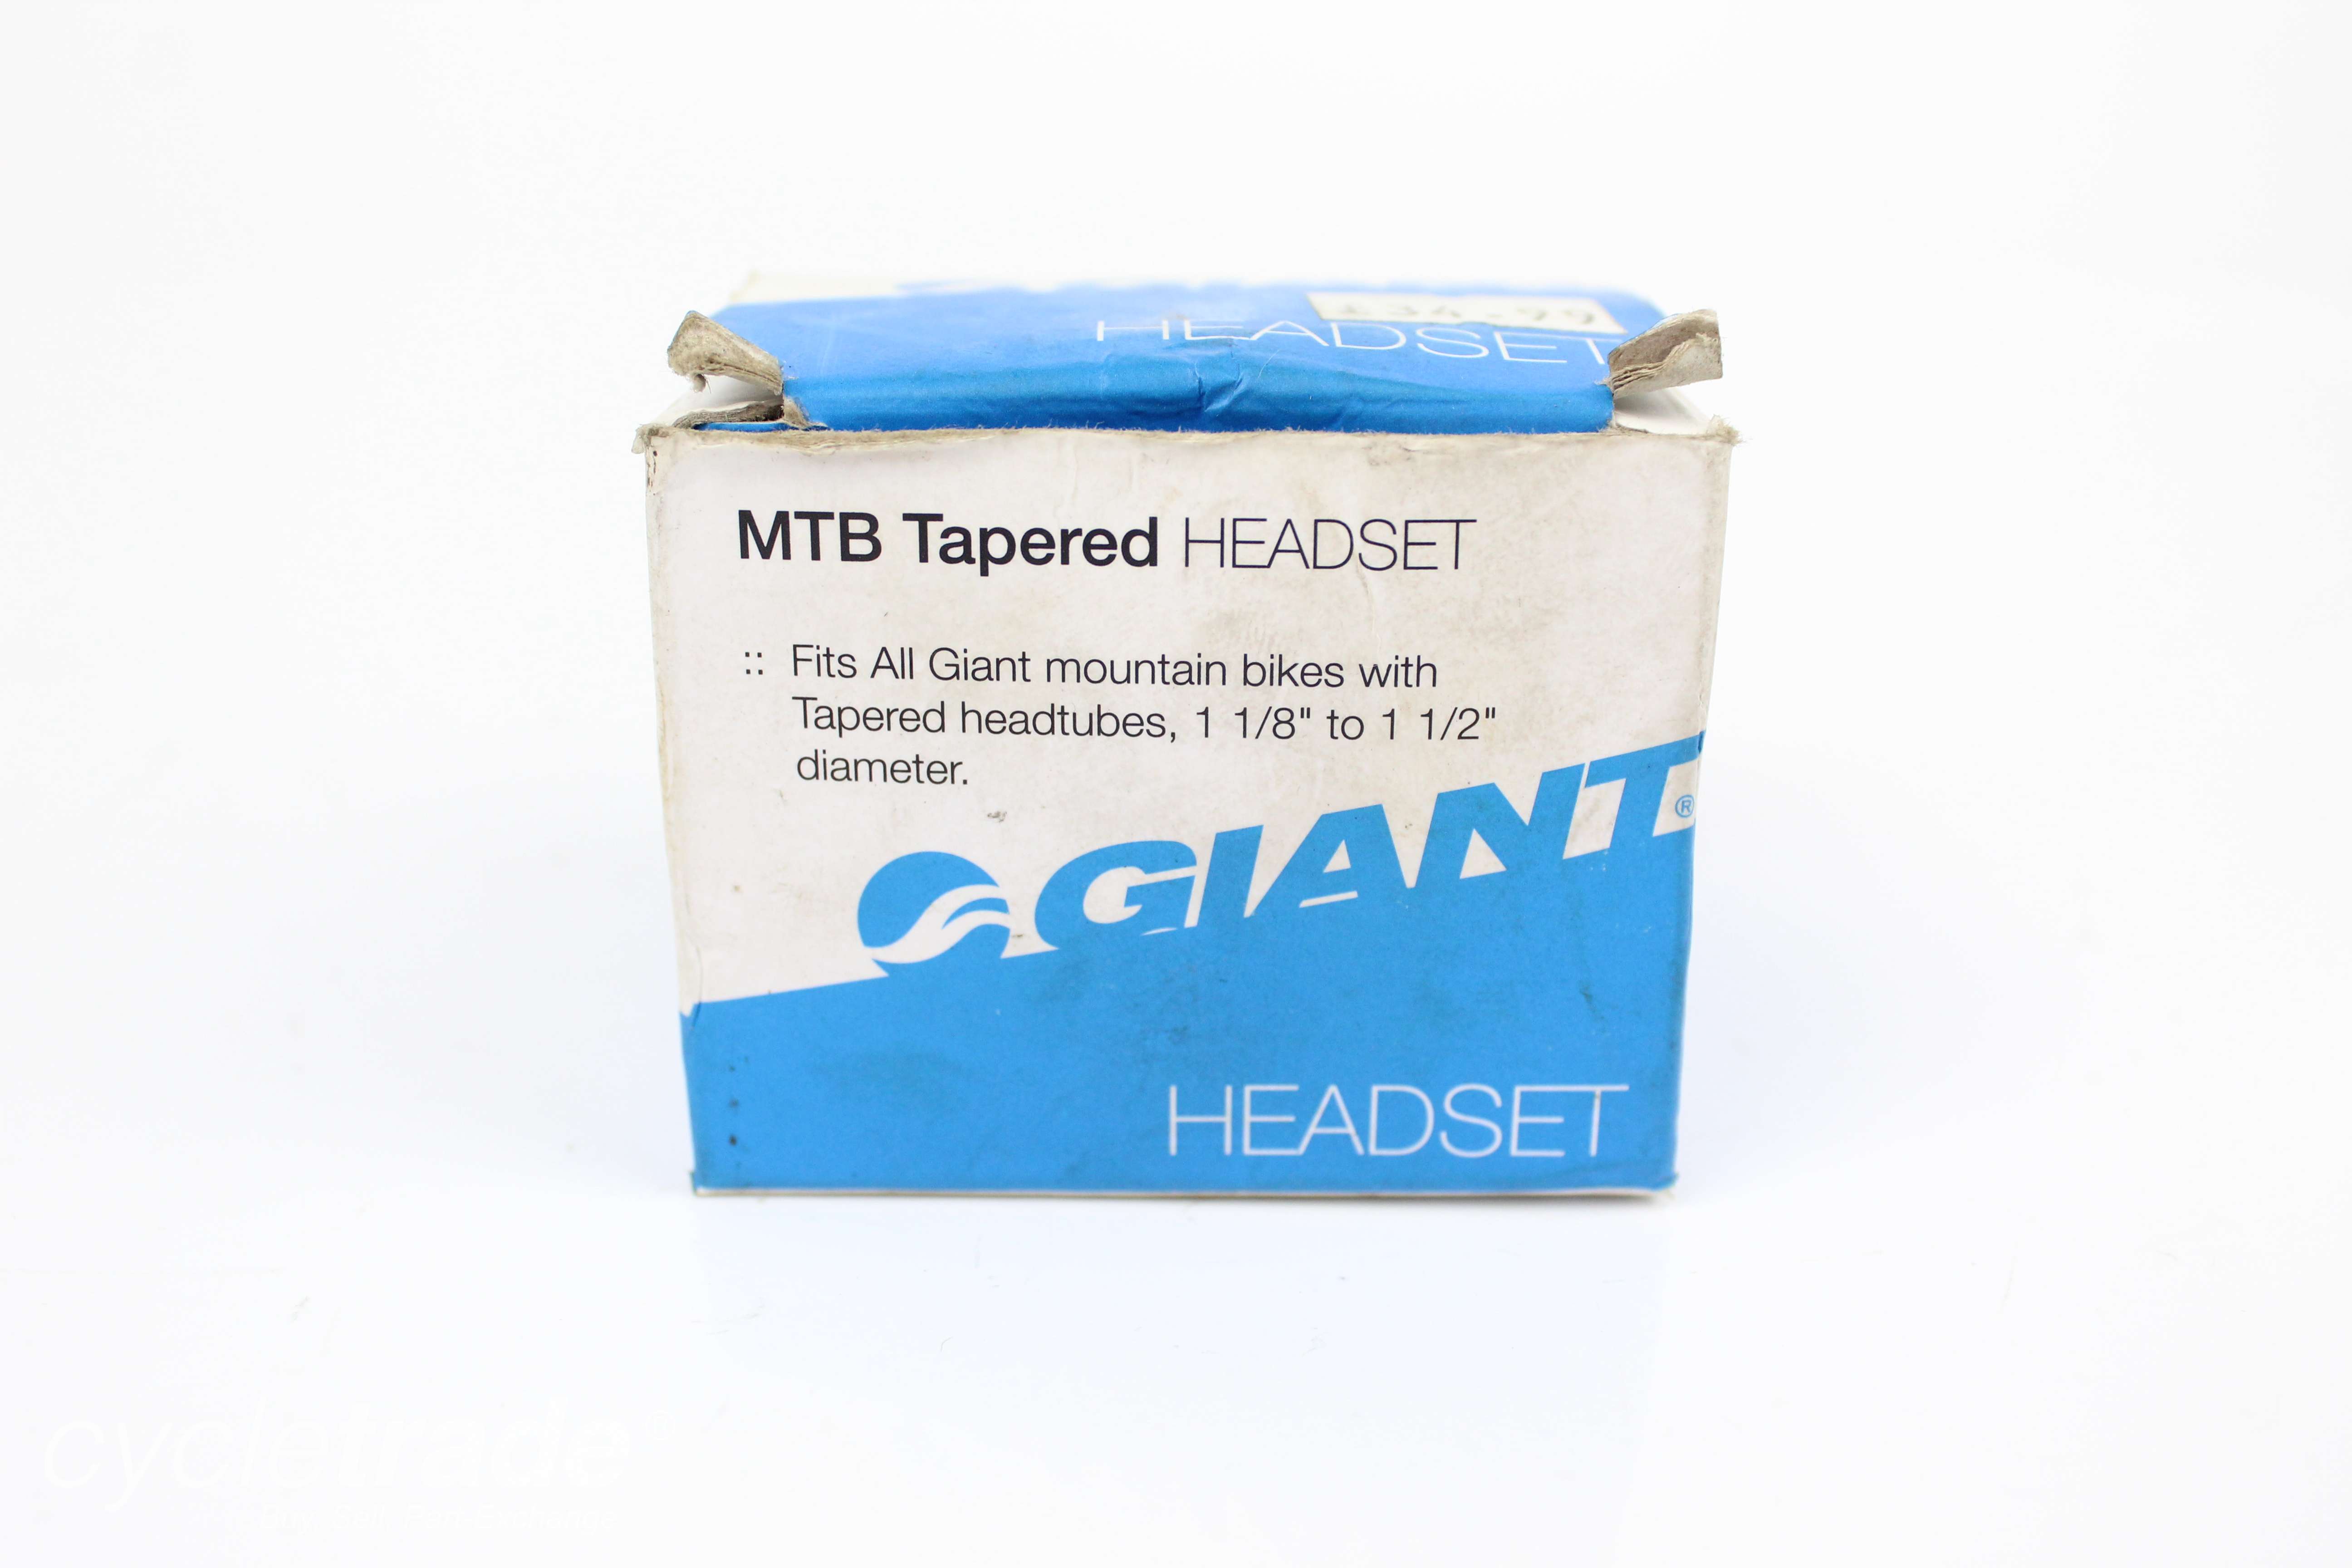 MTB Headset - Giant Tapered Headset 1 1/8-1 1/2" Black - Grade A+ NEW